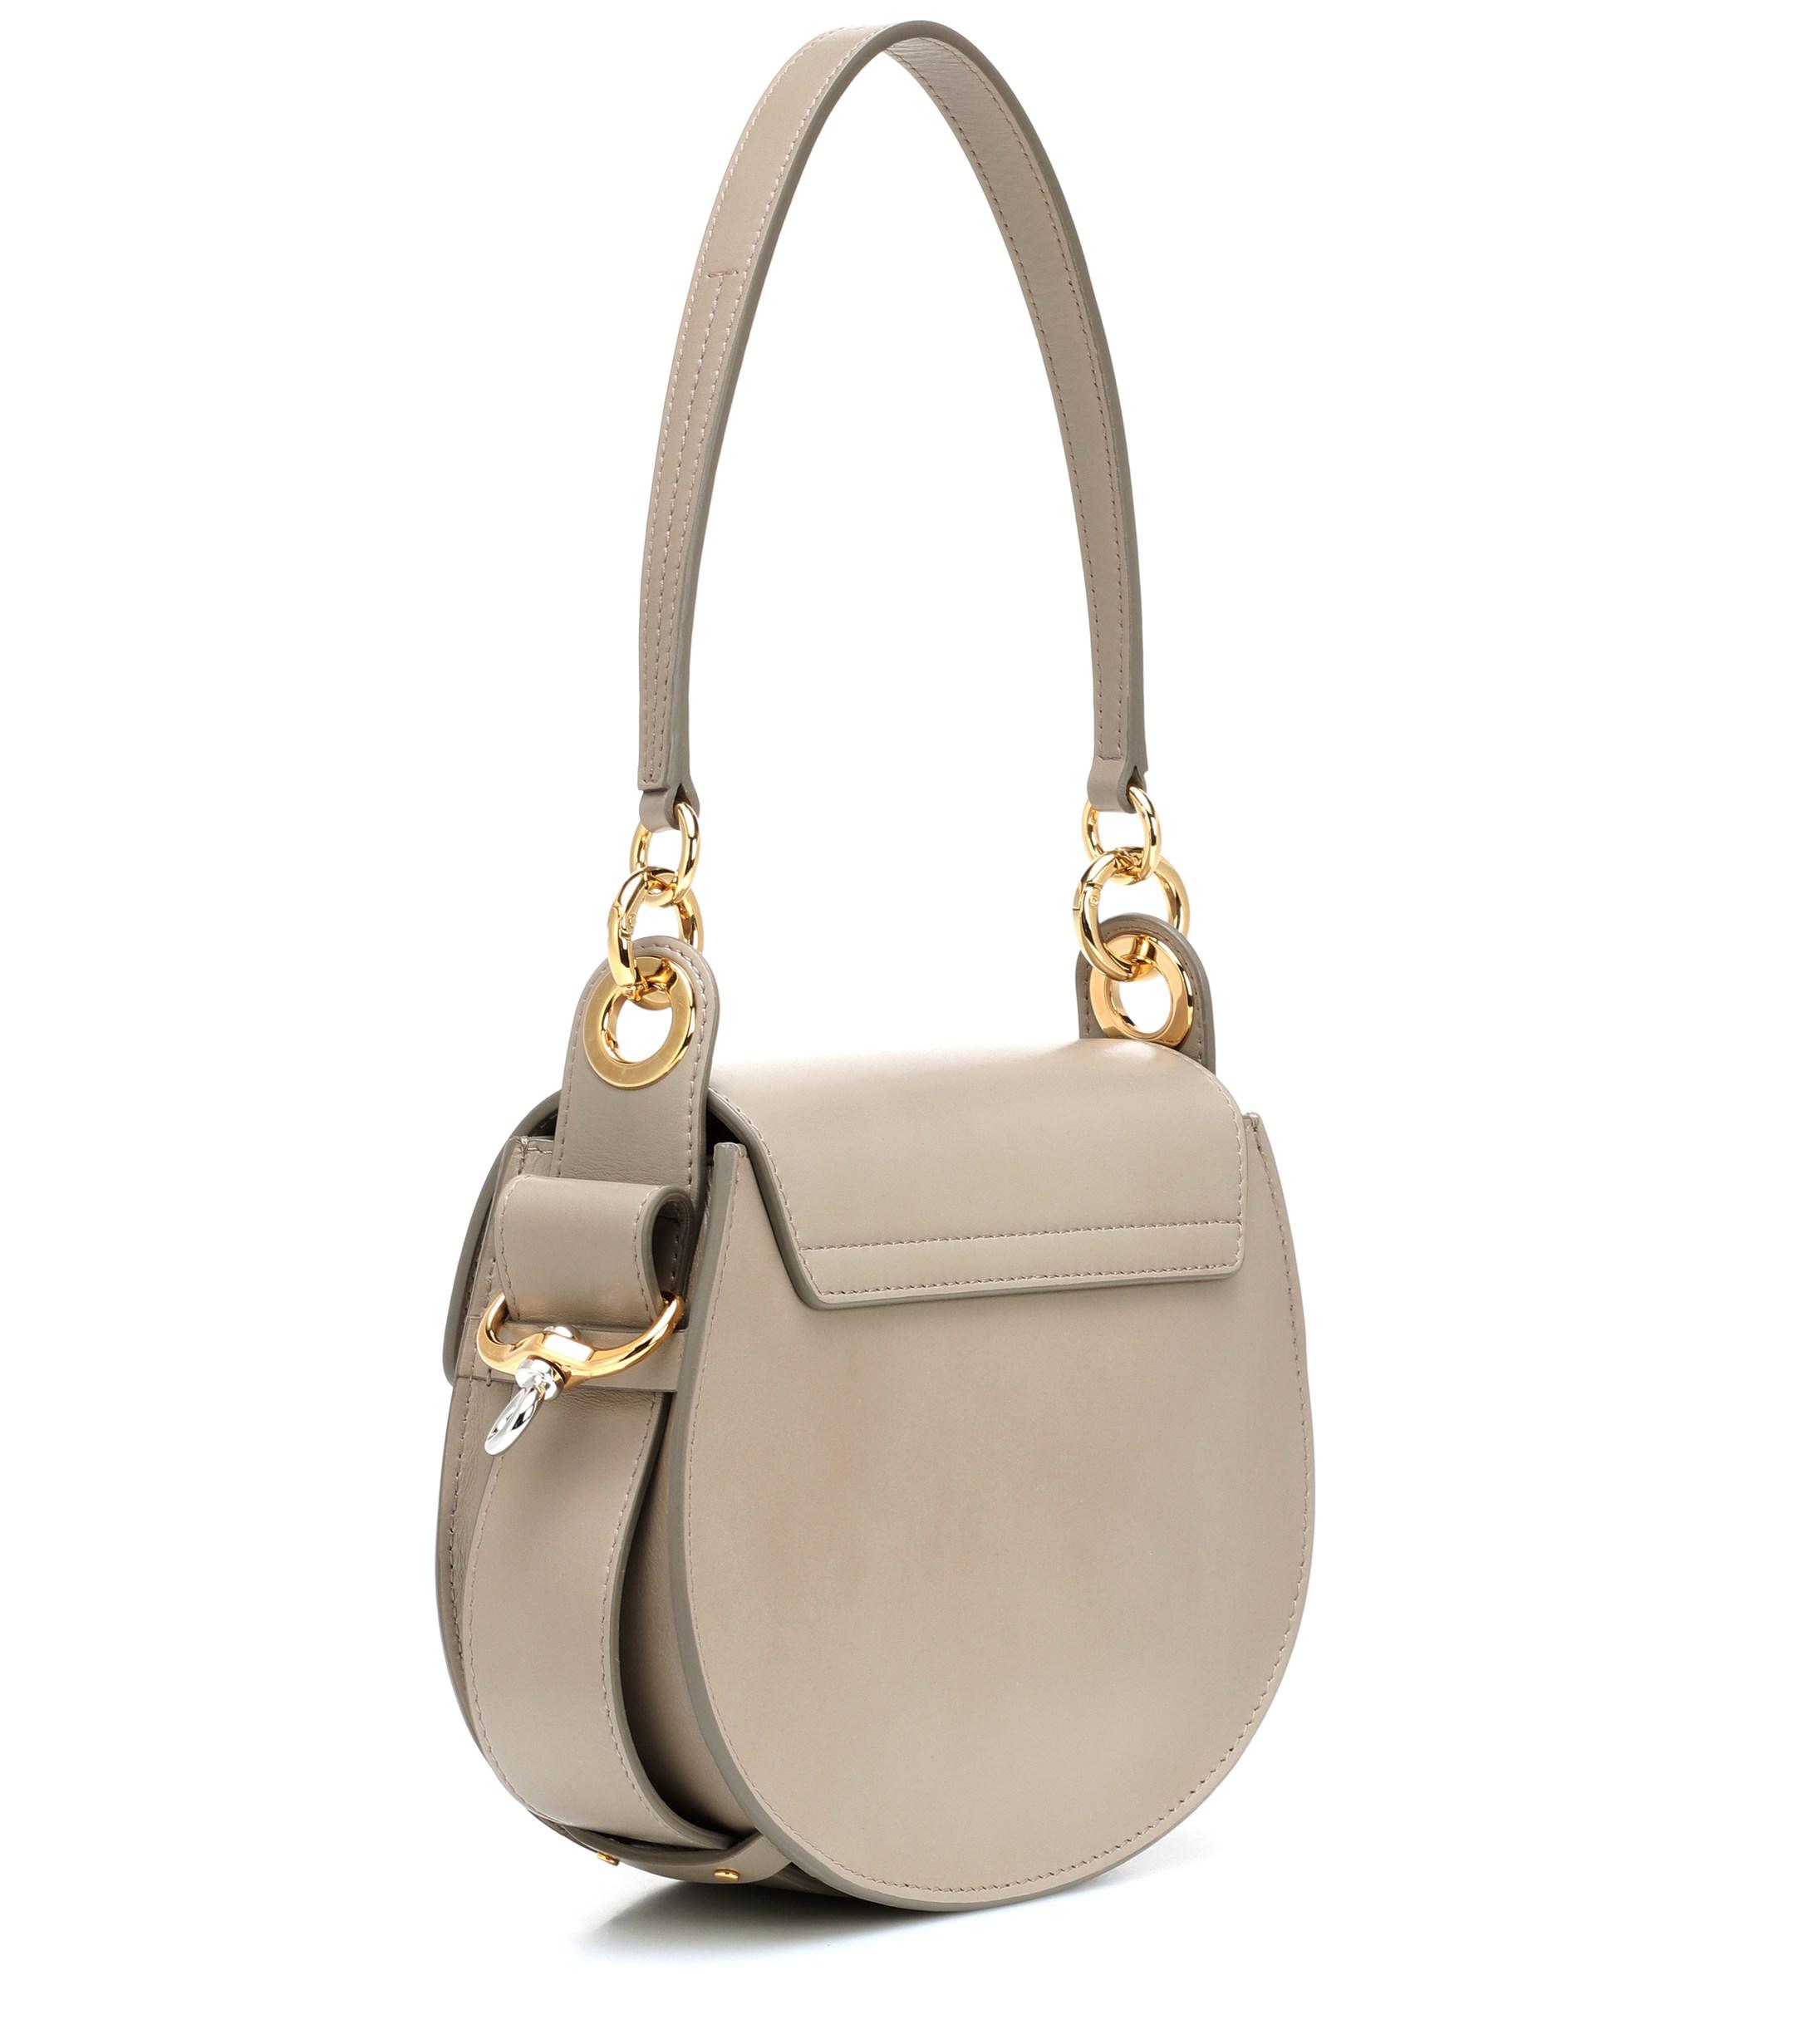 Chloé Tess Small Leather Shoulder Bag in Beige (Natural) - Lyst